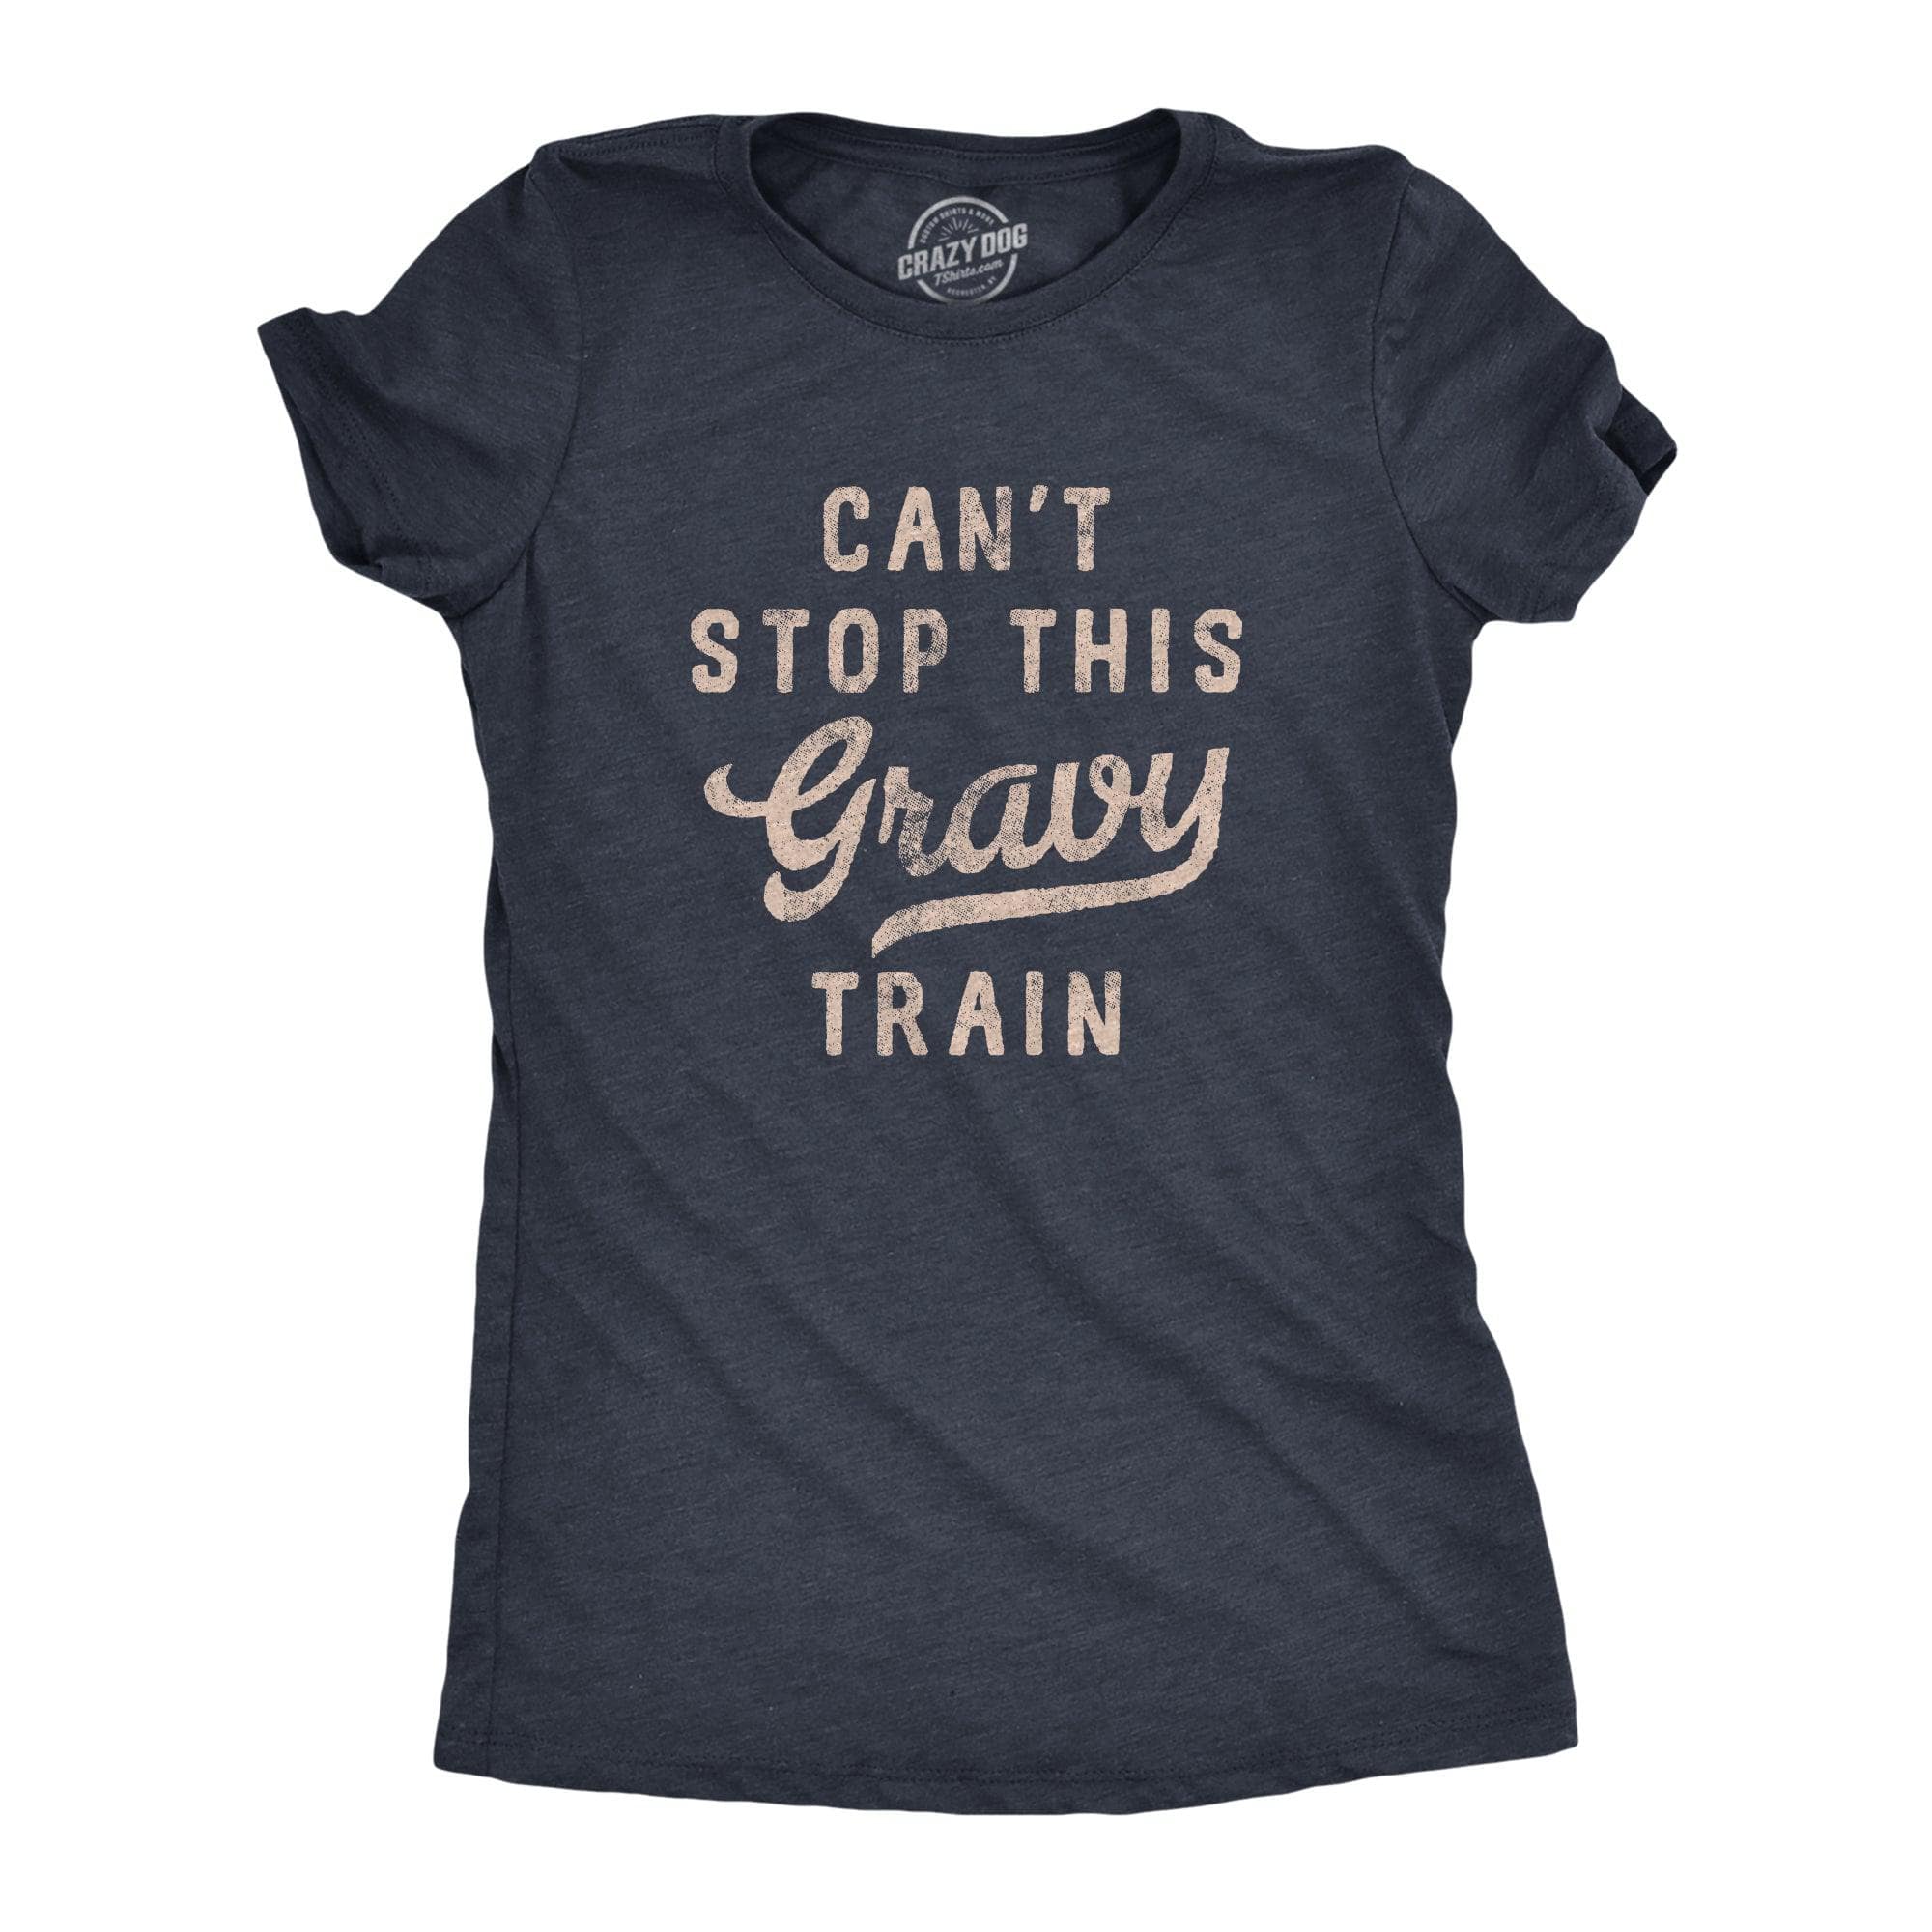 Cant Stop This Gravy Train Women's Tshirt  -  Crazy Dog T-Shirts